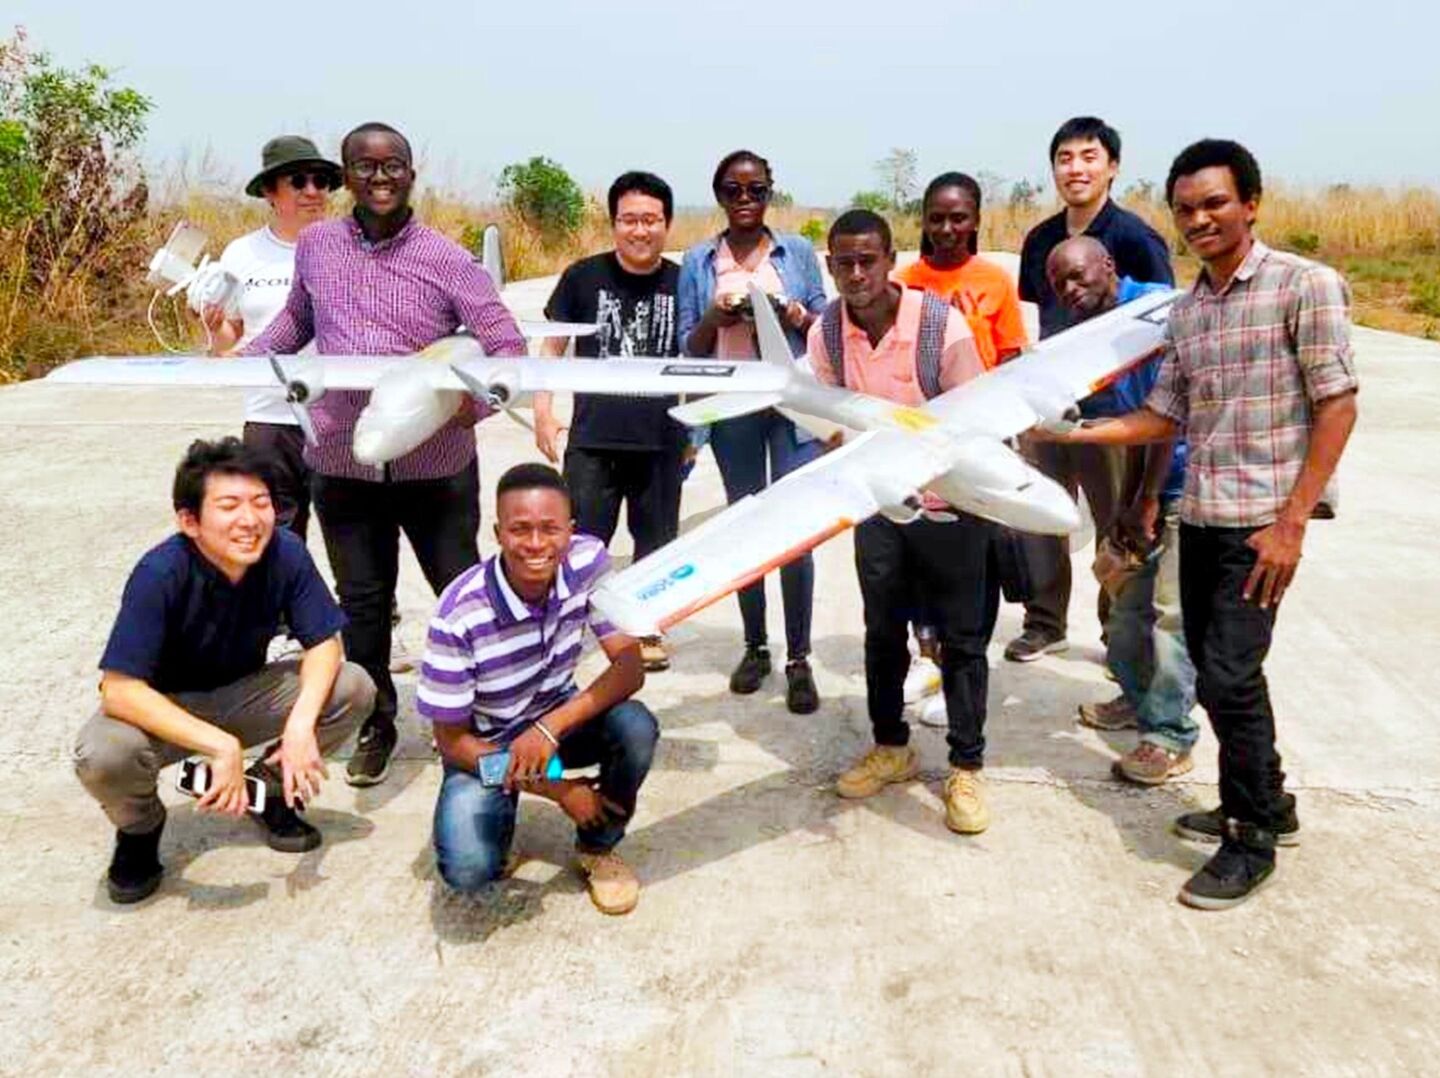 People posing for a group photo holding two fixed-wing, airplane-like, type drones in Sierra Leone.